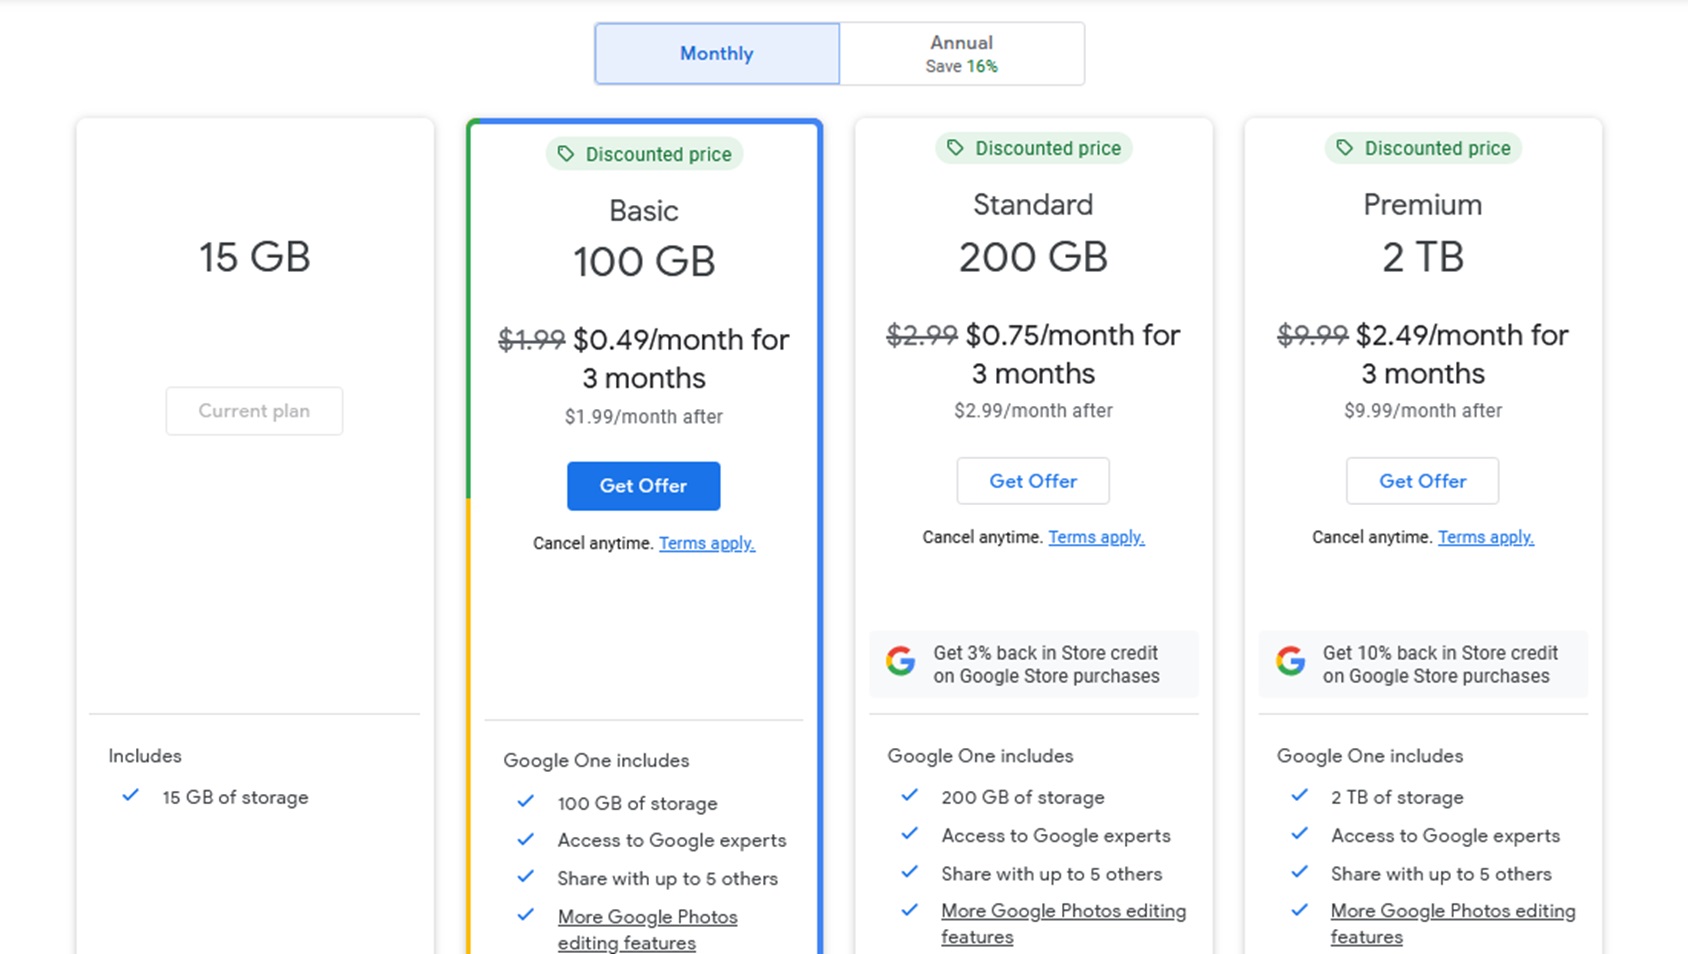 Updated pricing tiers for Google One storage plans.